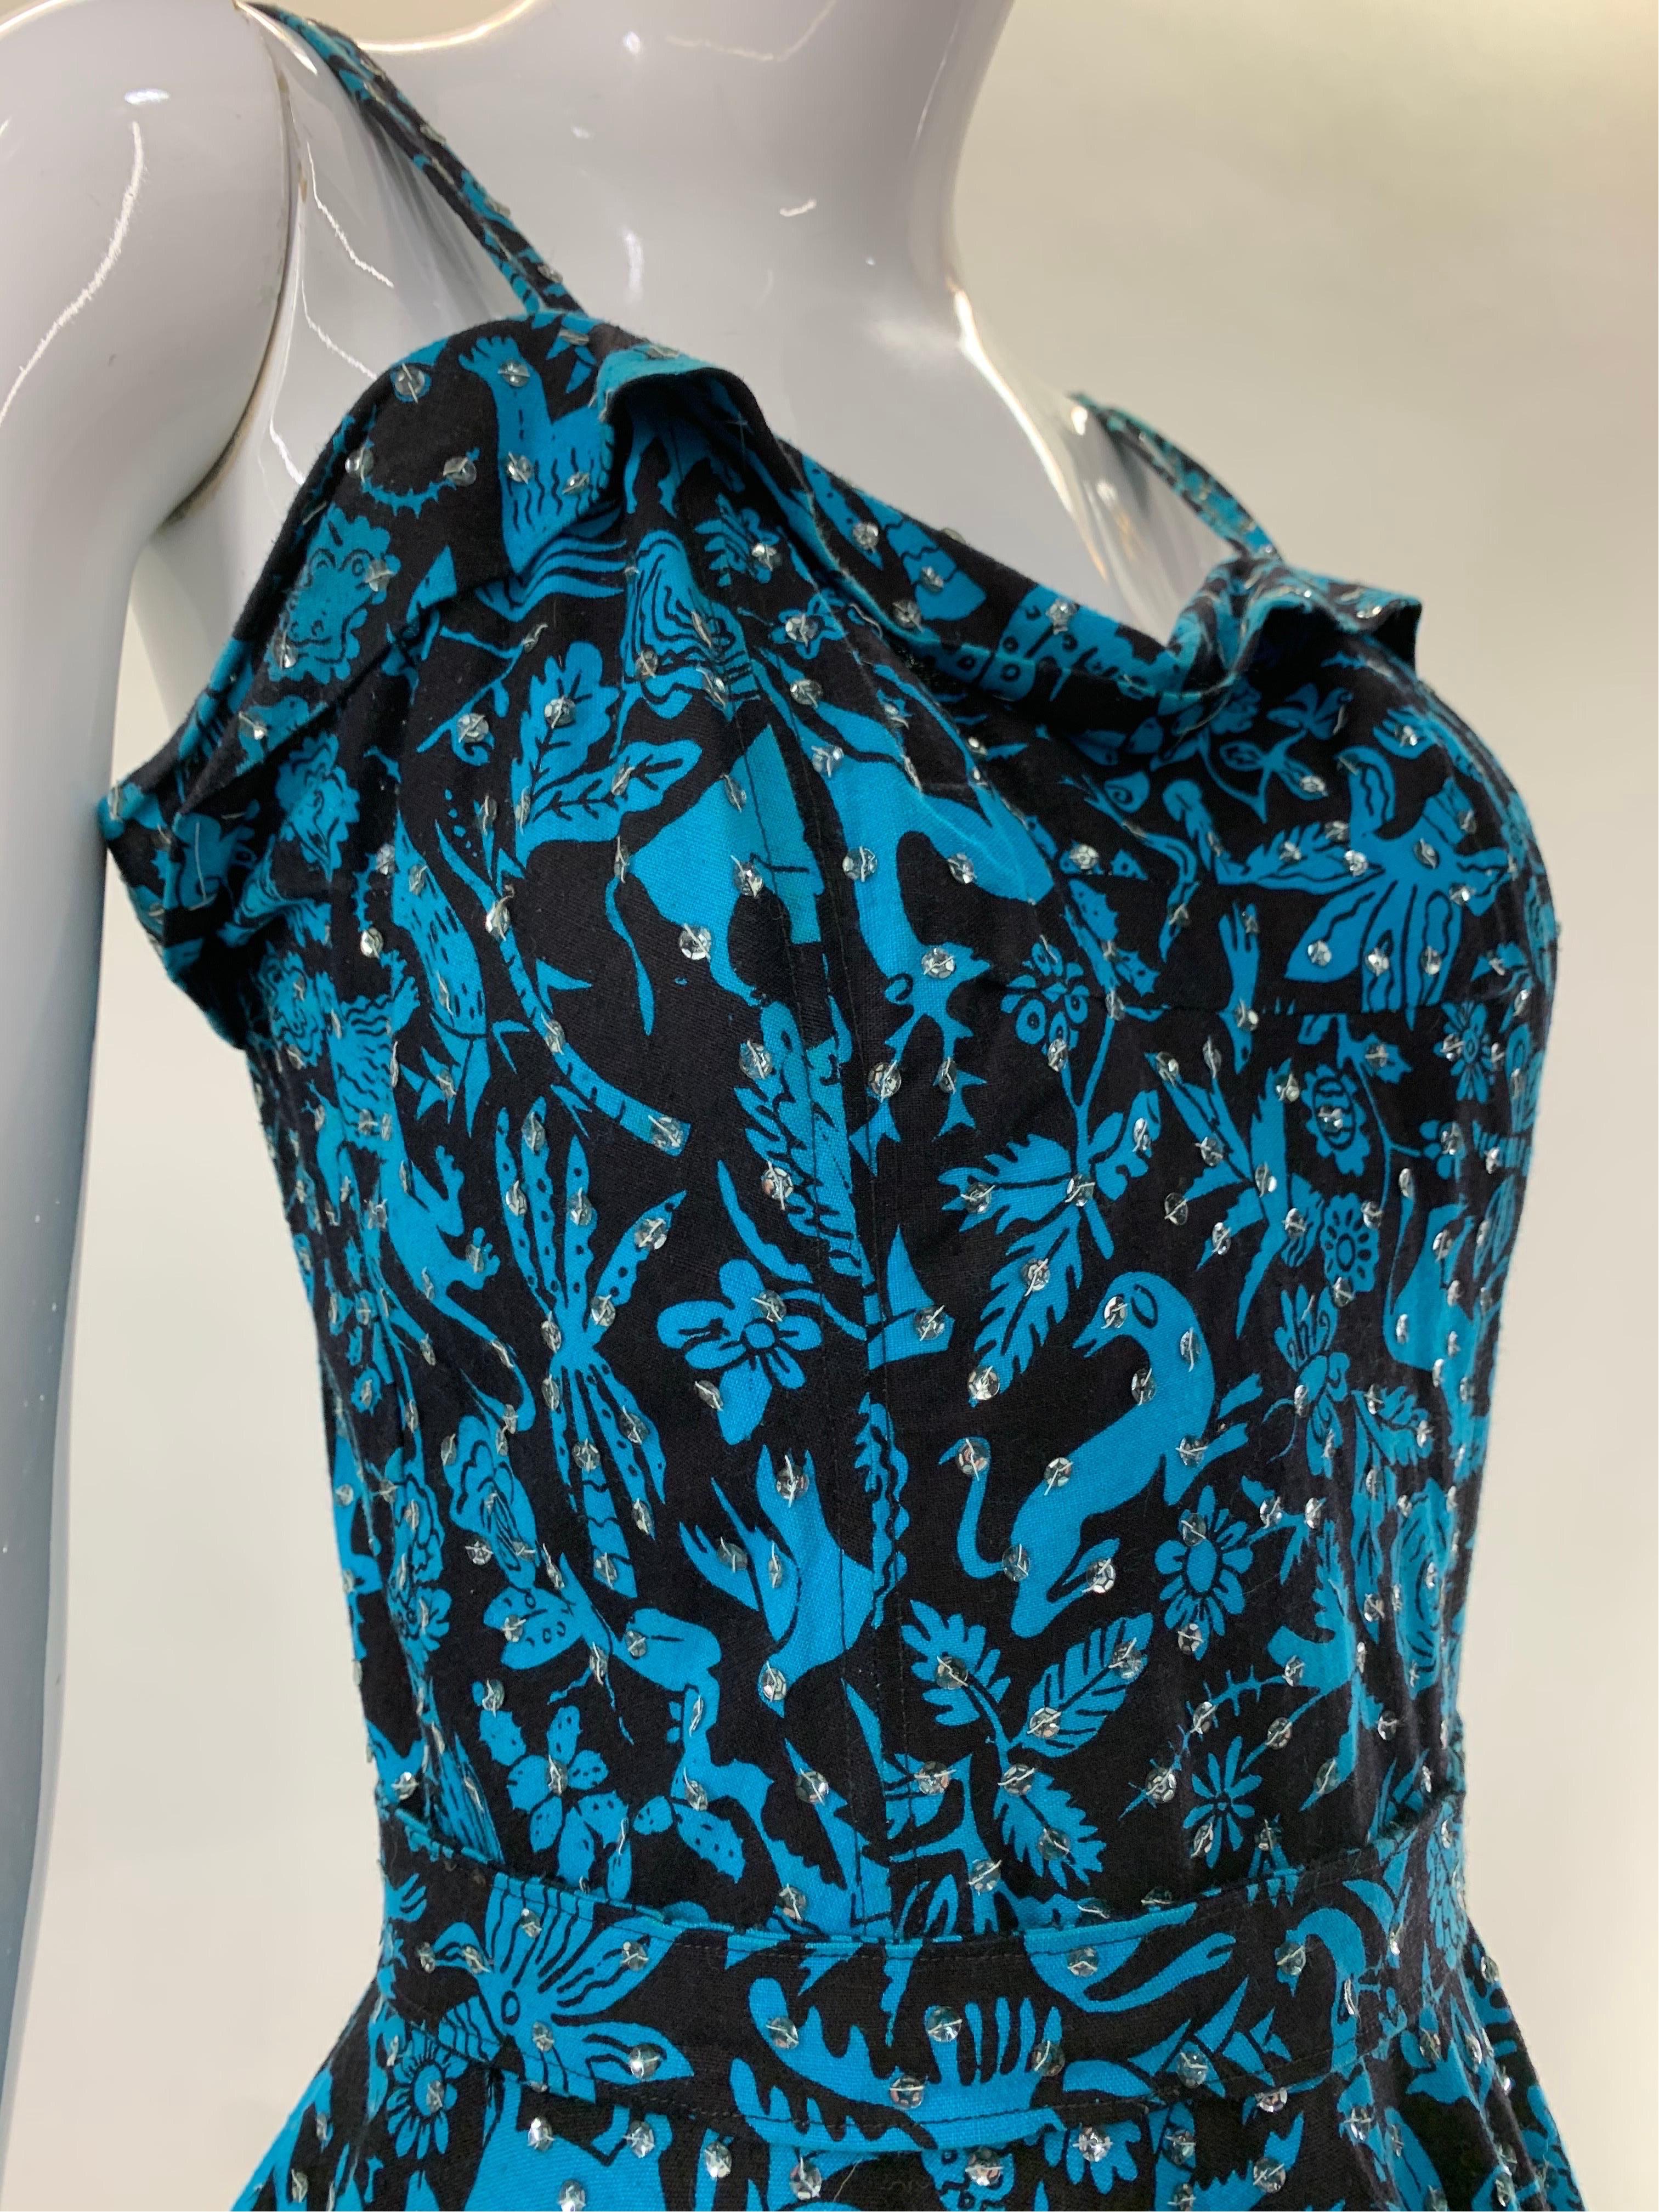 1950s Turquoise & Black Folkloric Print Cotton Summer Dress w/ Scattered Sequins In Excellent Condition For Sale In Gresham, OR